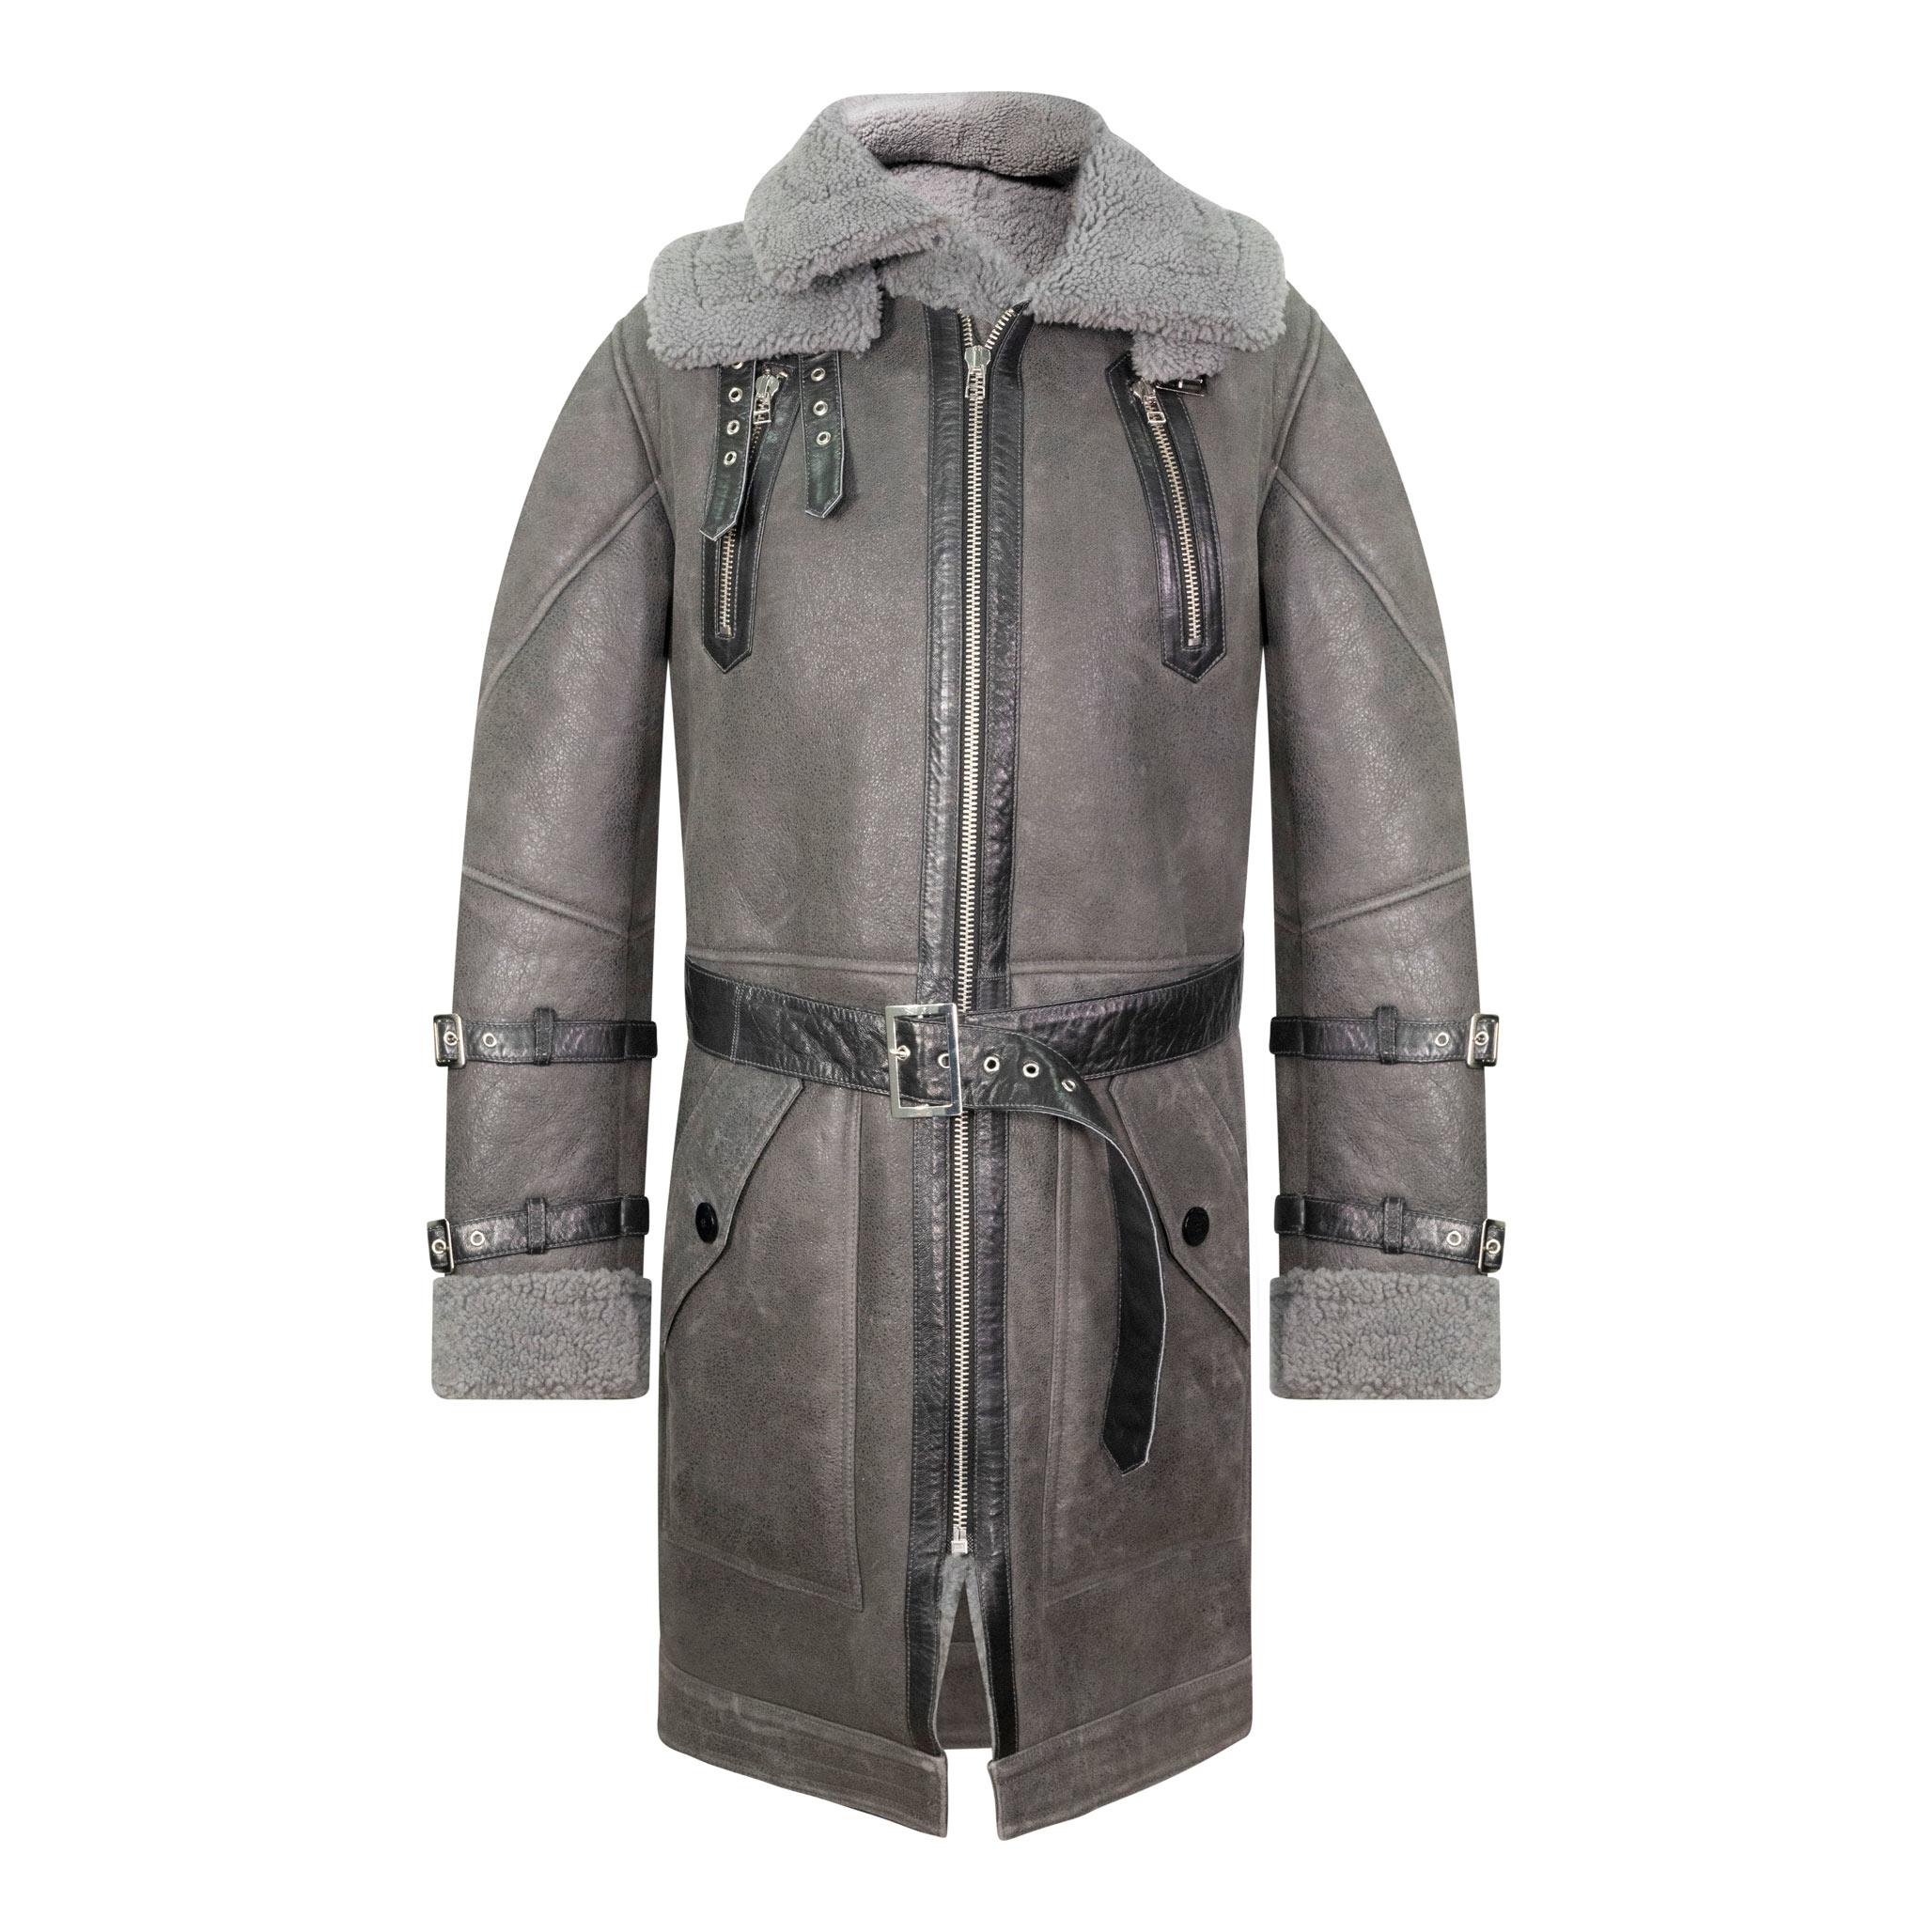 An beautiful long grey sheepskin trench coat, with a black front fastening belt, and collar buckles, and a chunky front zip fastening.